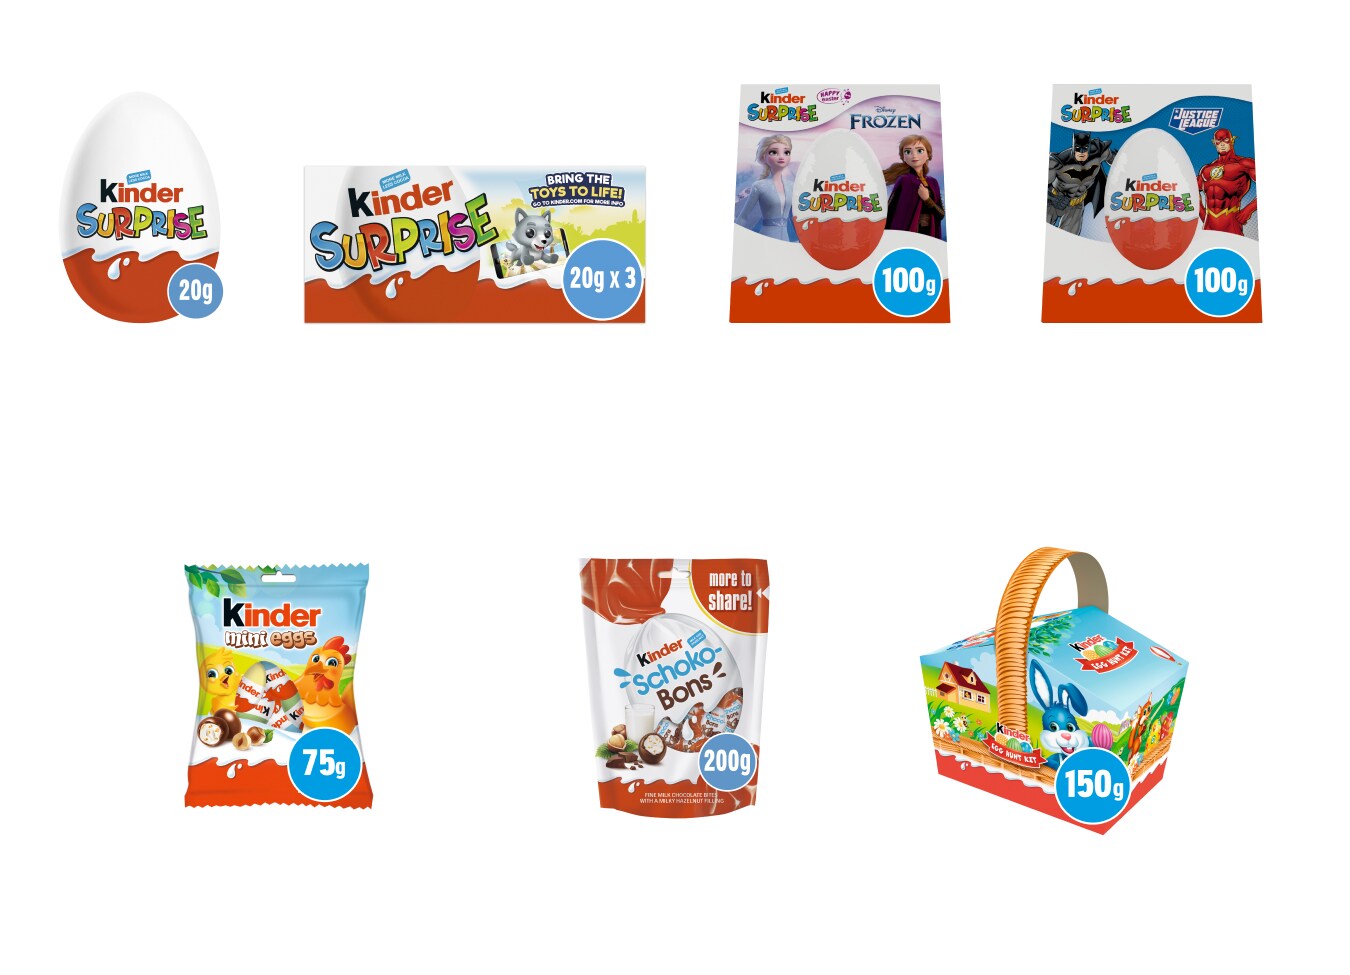 Kinder product selection